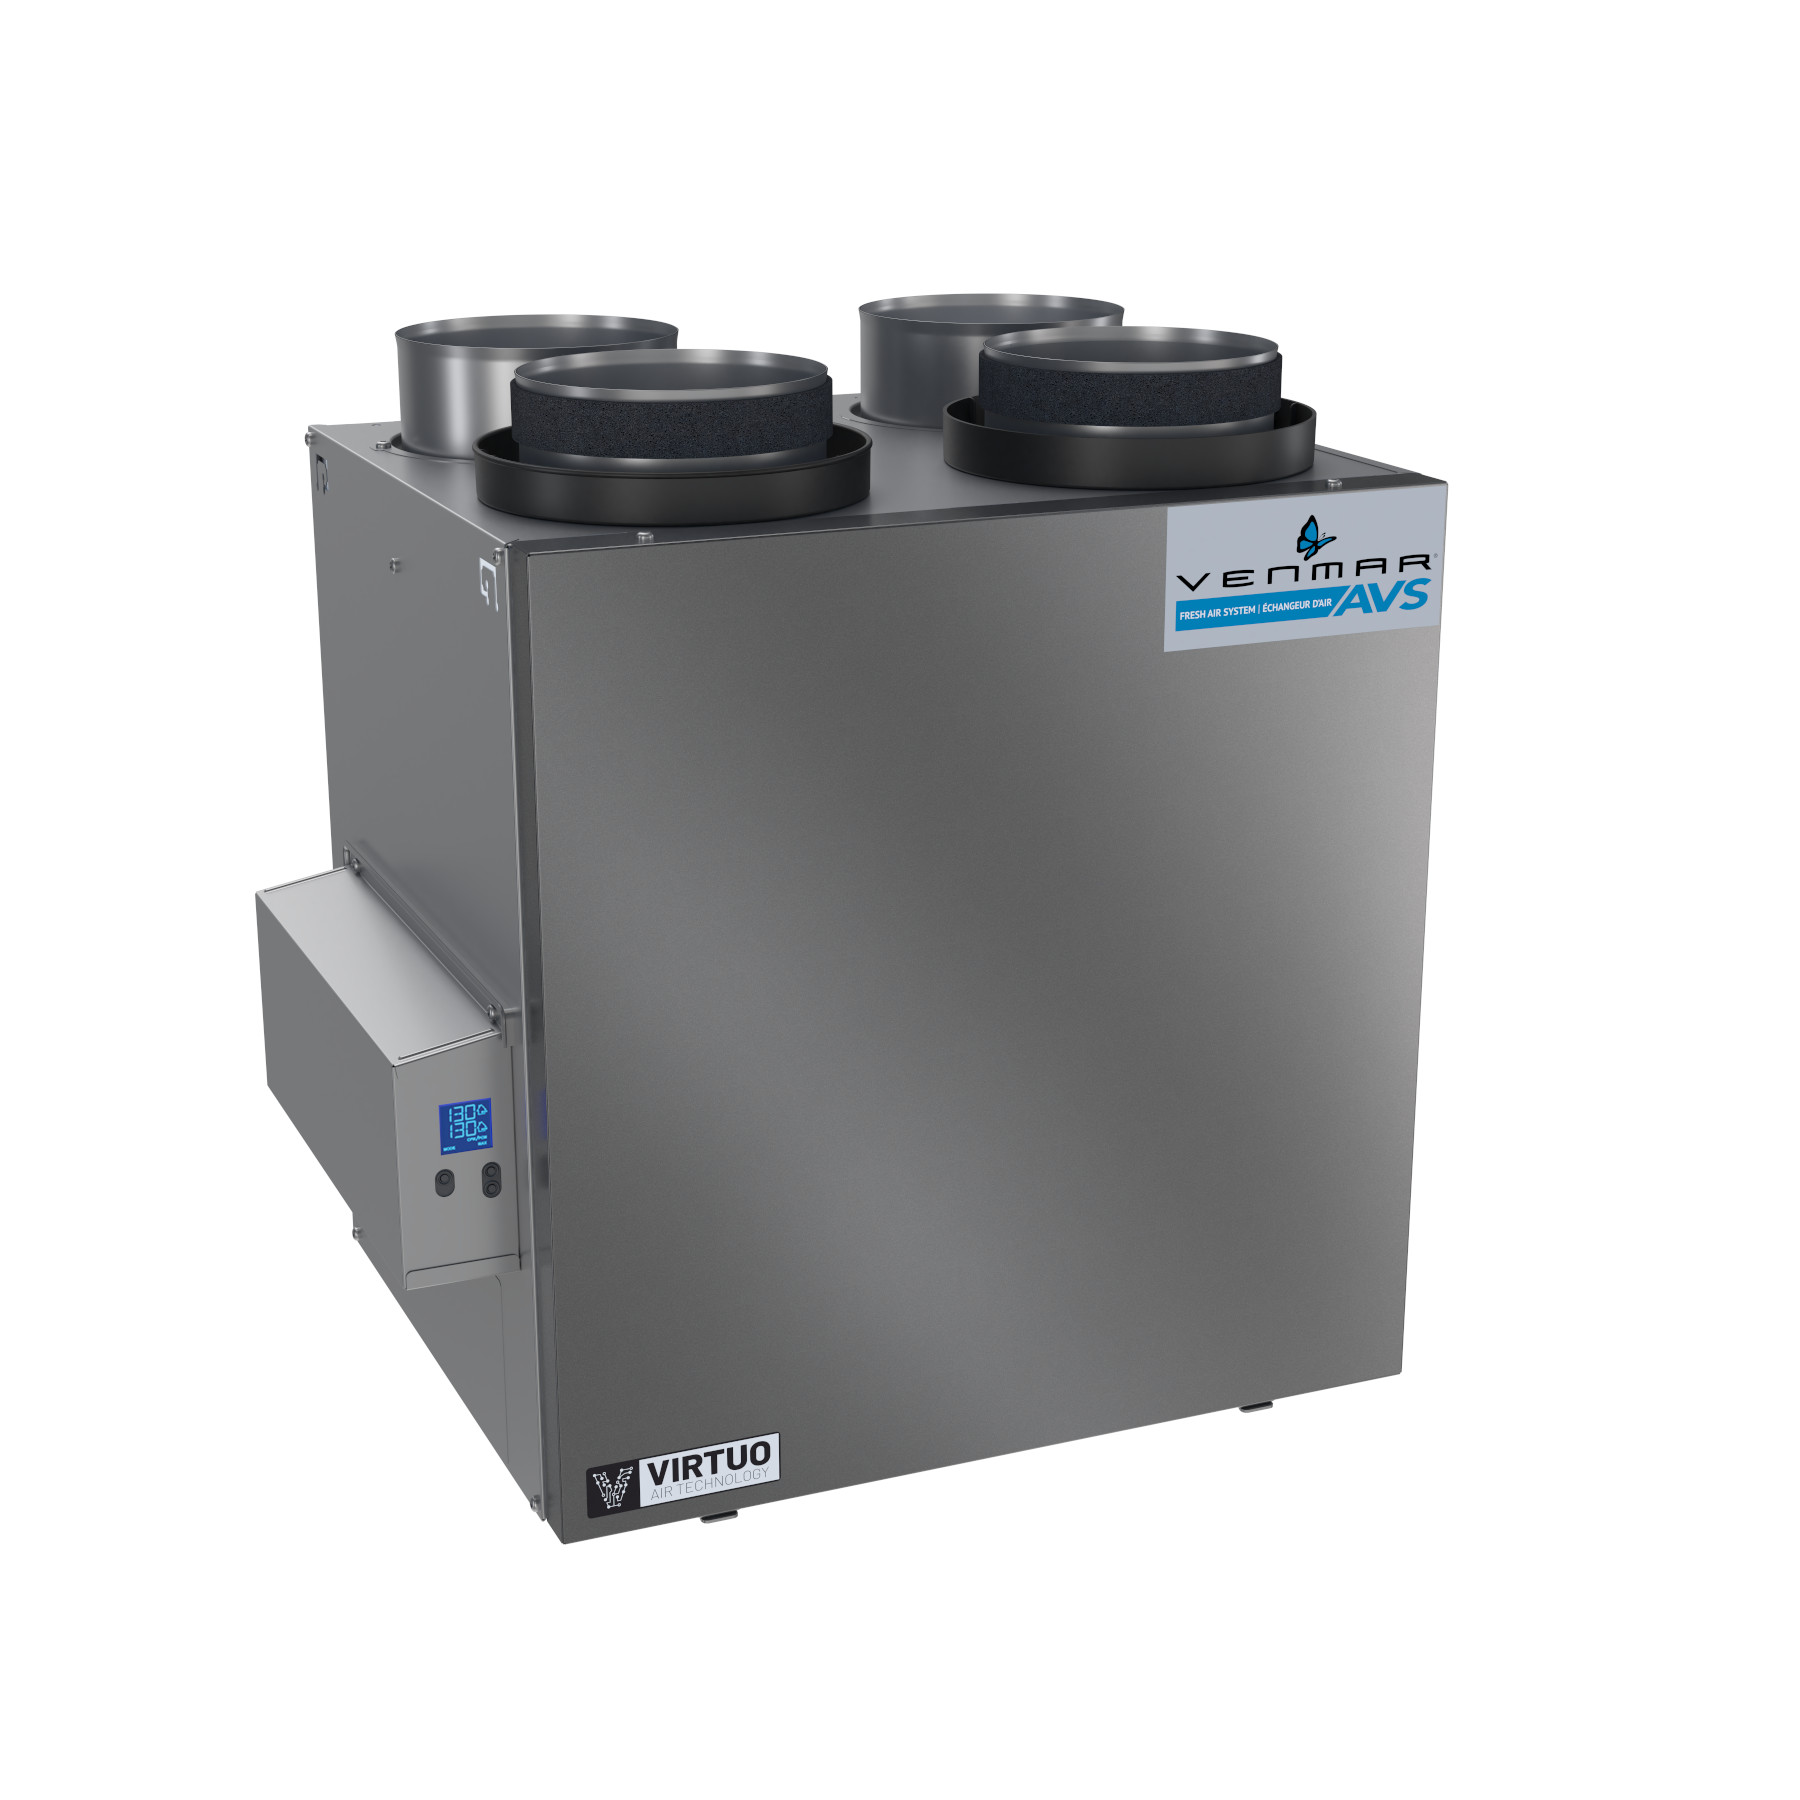 Venmar AVS® N Series HRV 112 CFM 68% SRE with Virtuo Air Technology™ Top ports